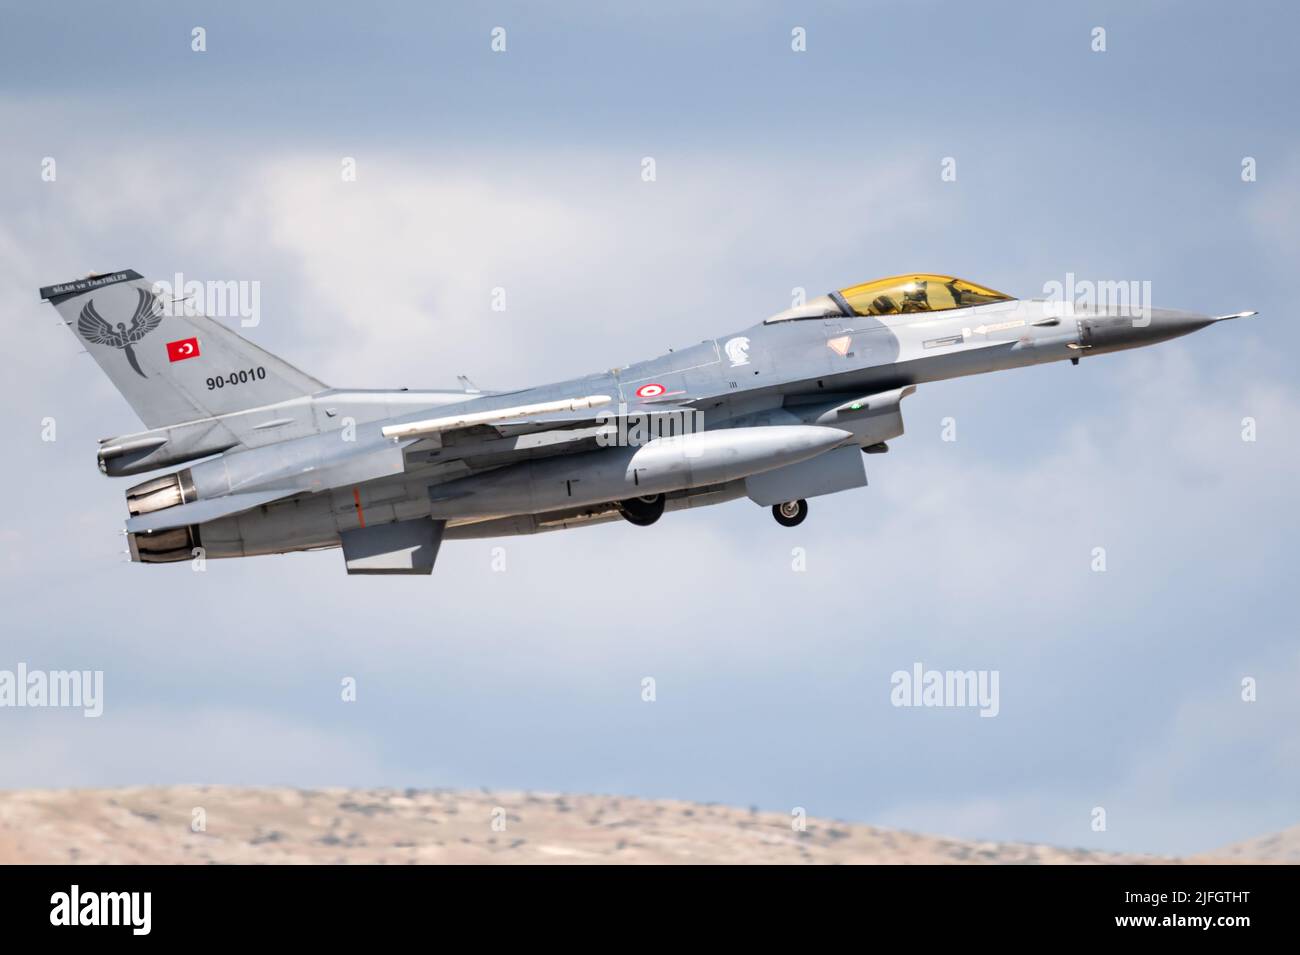 A F-16 Fighting Falcon fighter jet of the Turkish Air Force at the Konya Air Base in Turkey. Stock Photo